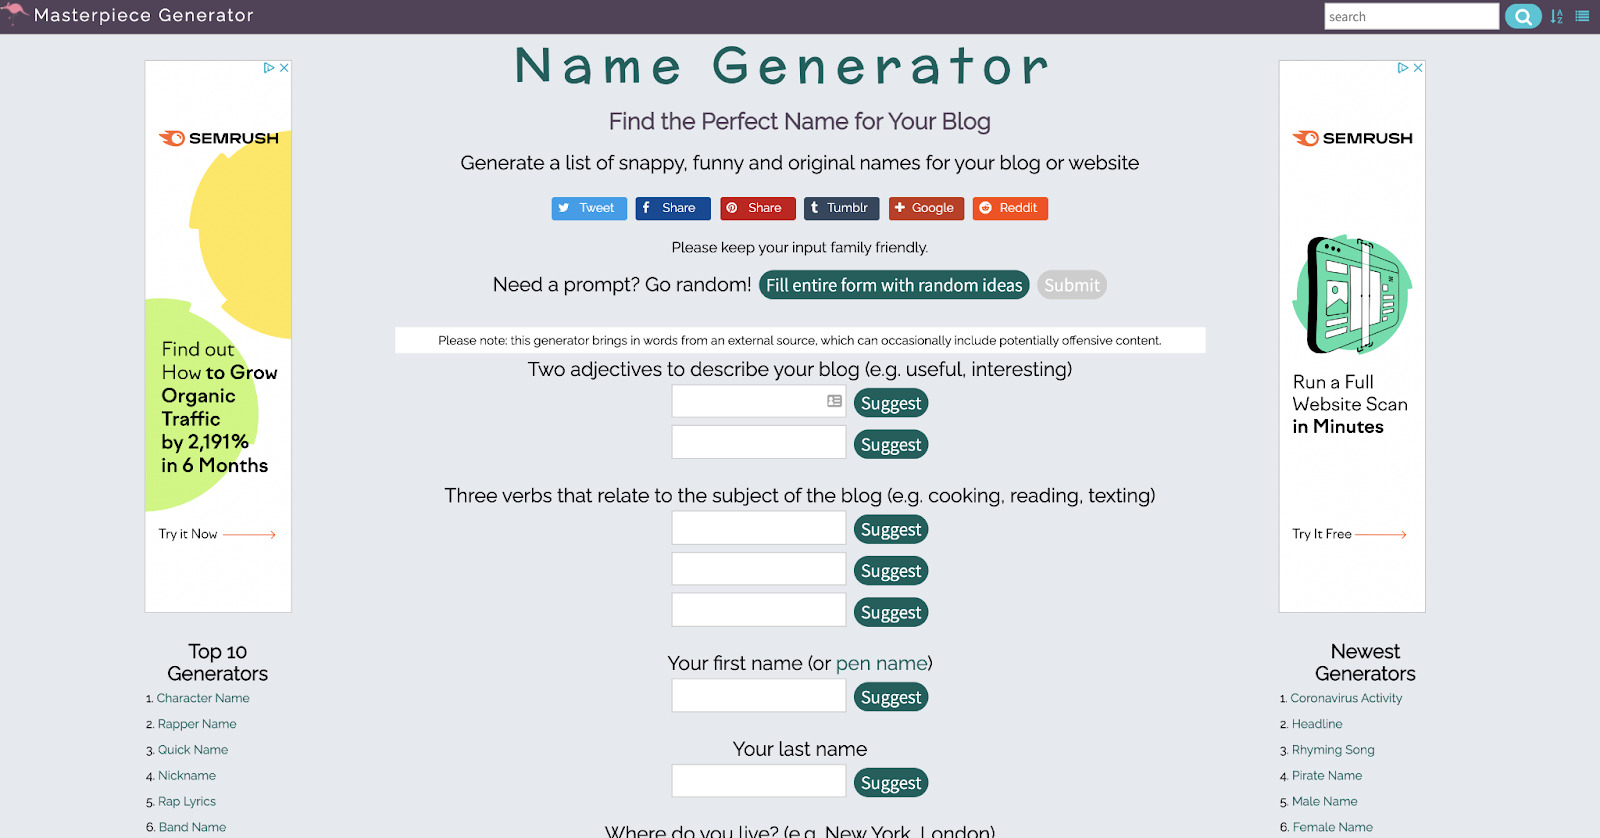 Masterpiece Generator can help link your blog name ideas